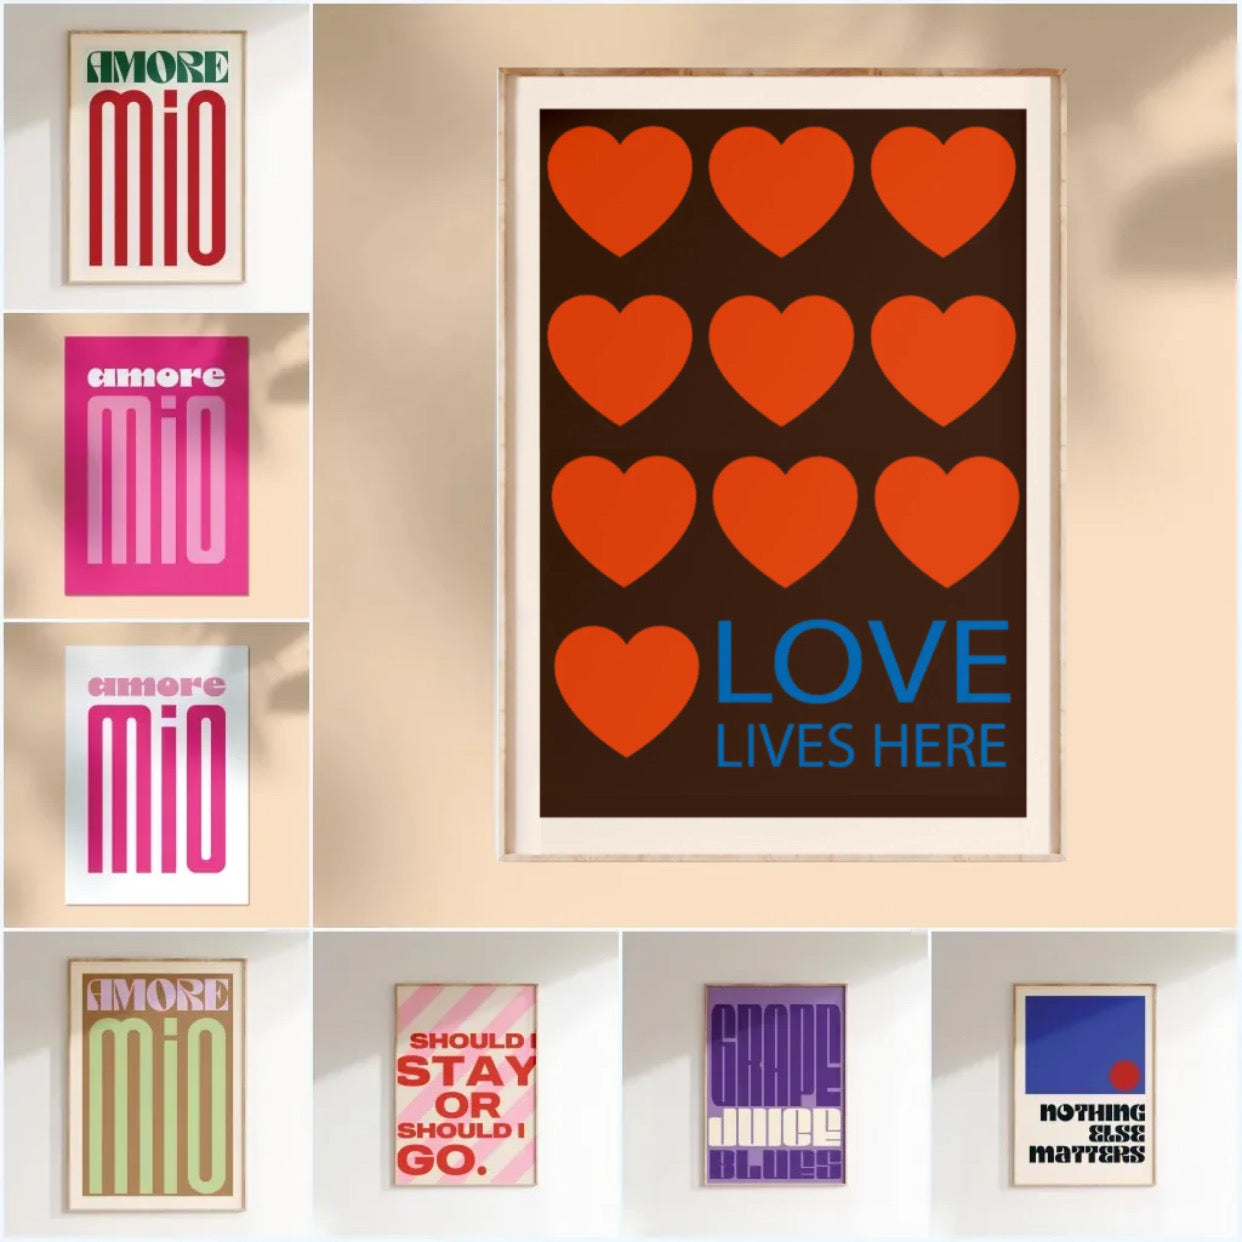 " love lives here" poster